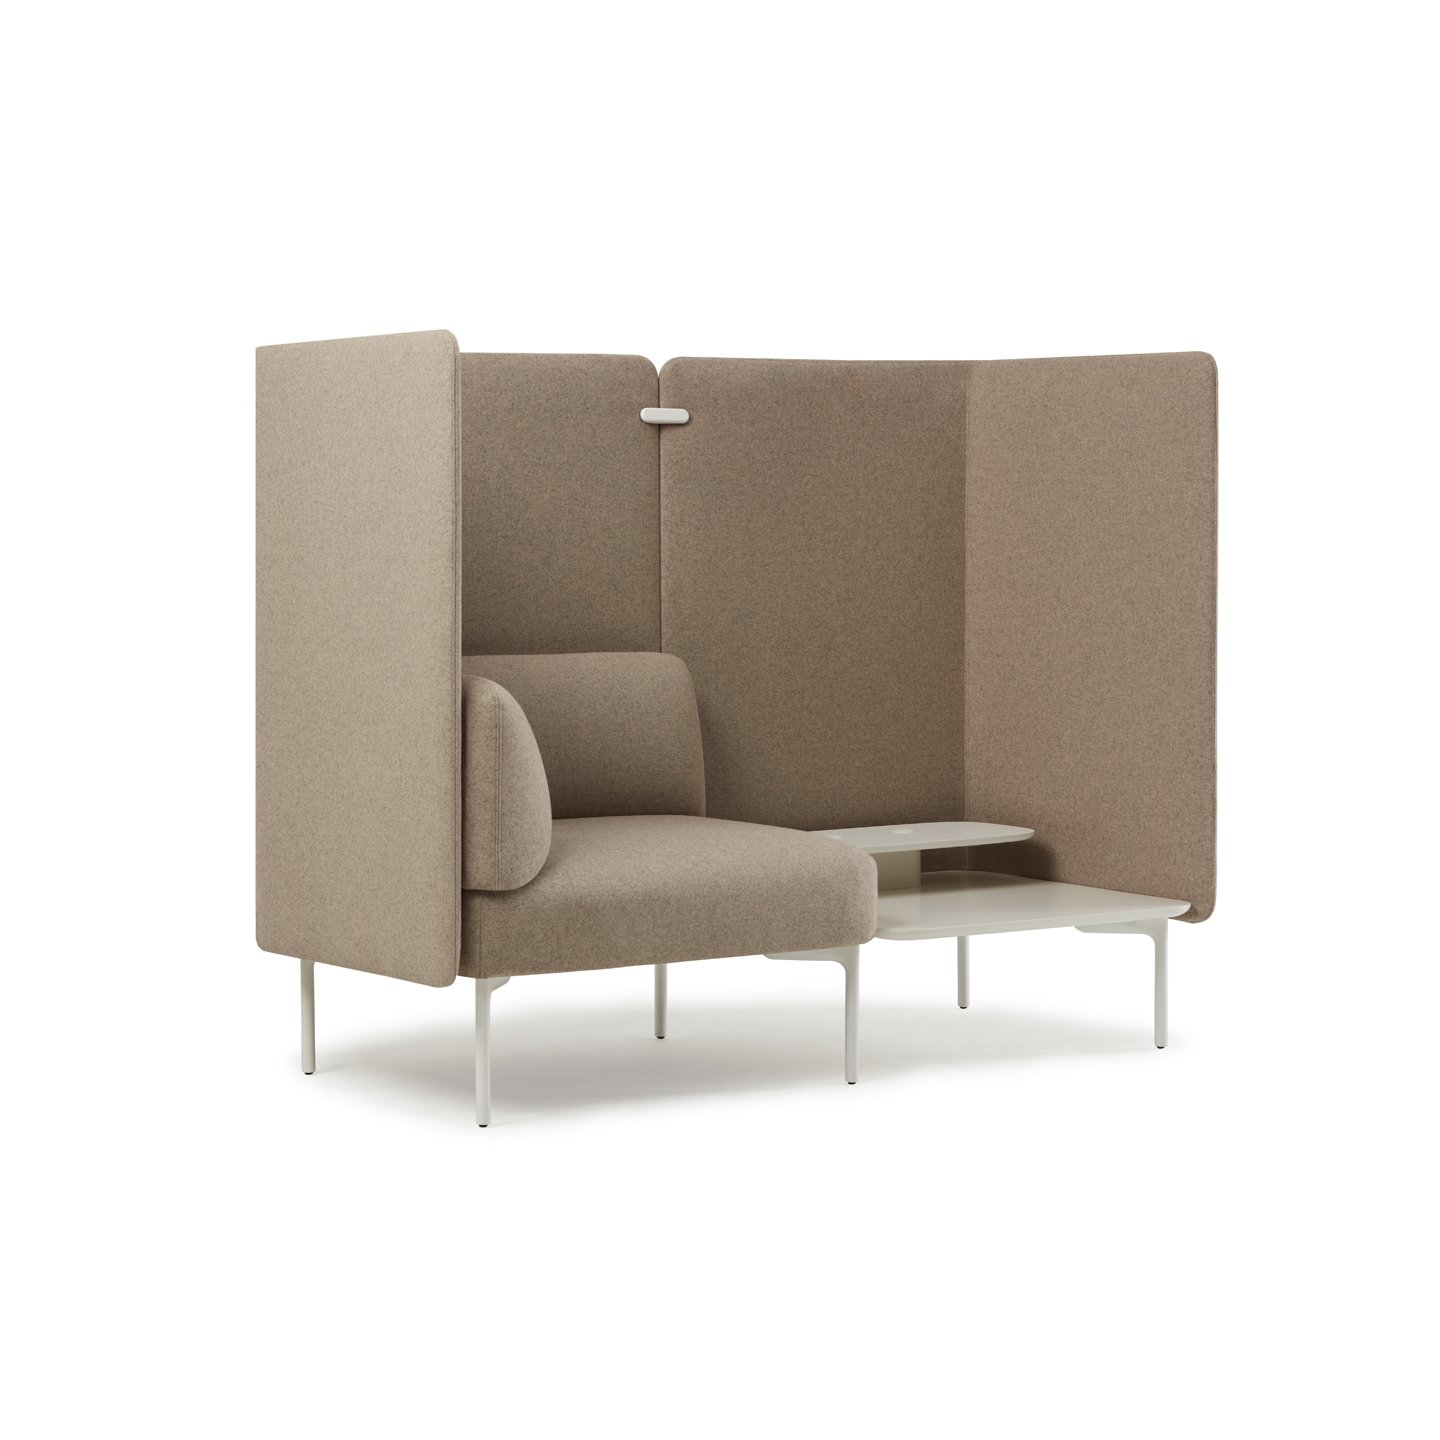 Cabana Lounge chair with acoustic screens and side table